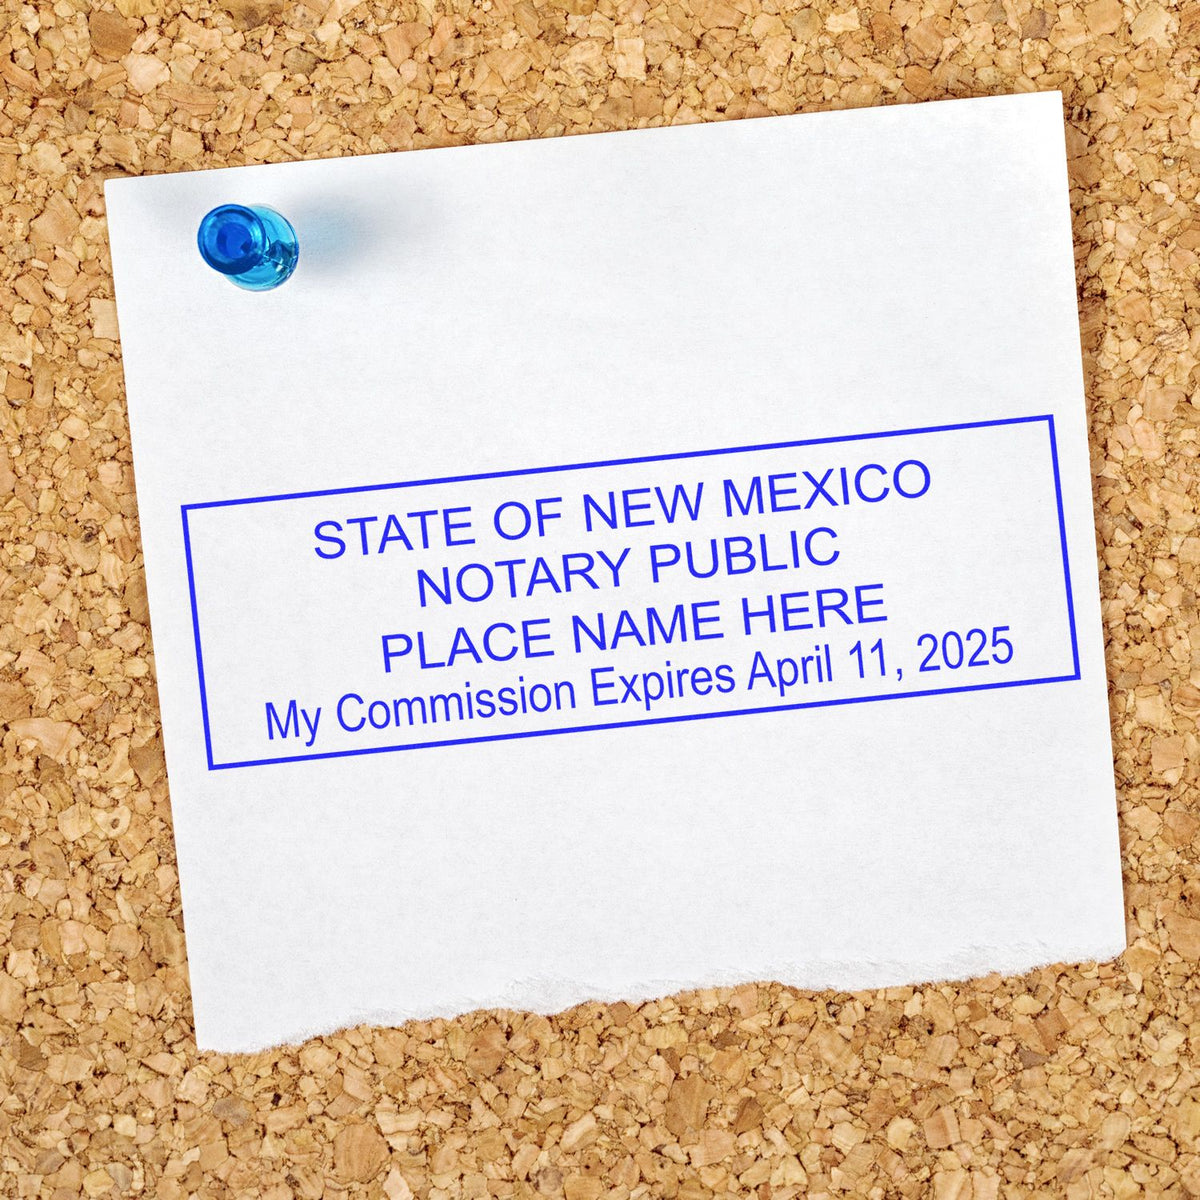 A stamped impression of the Super Slim New Mexico Notary Public Stamp in this stylish lifestyle photo, setting the tone for a unique and personalized product.